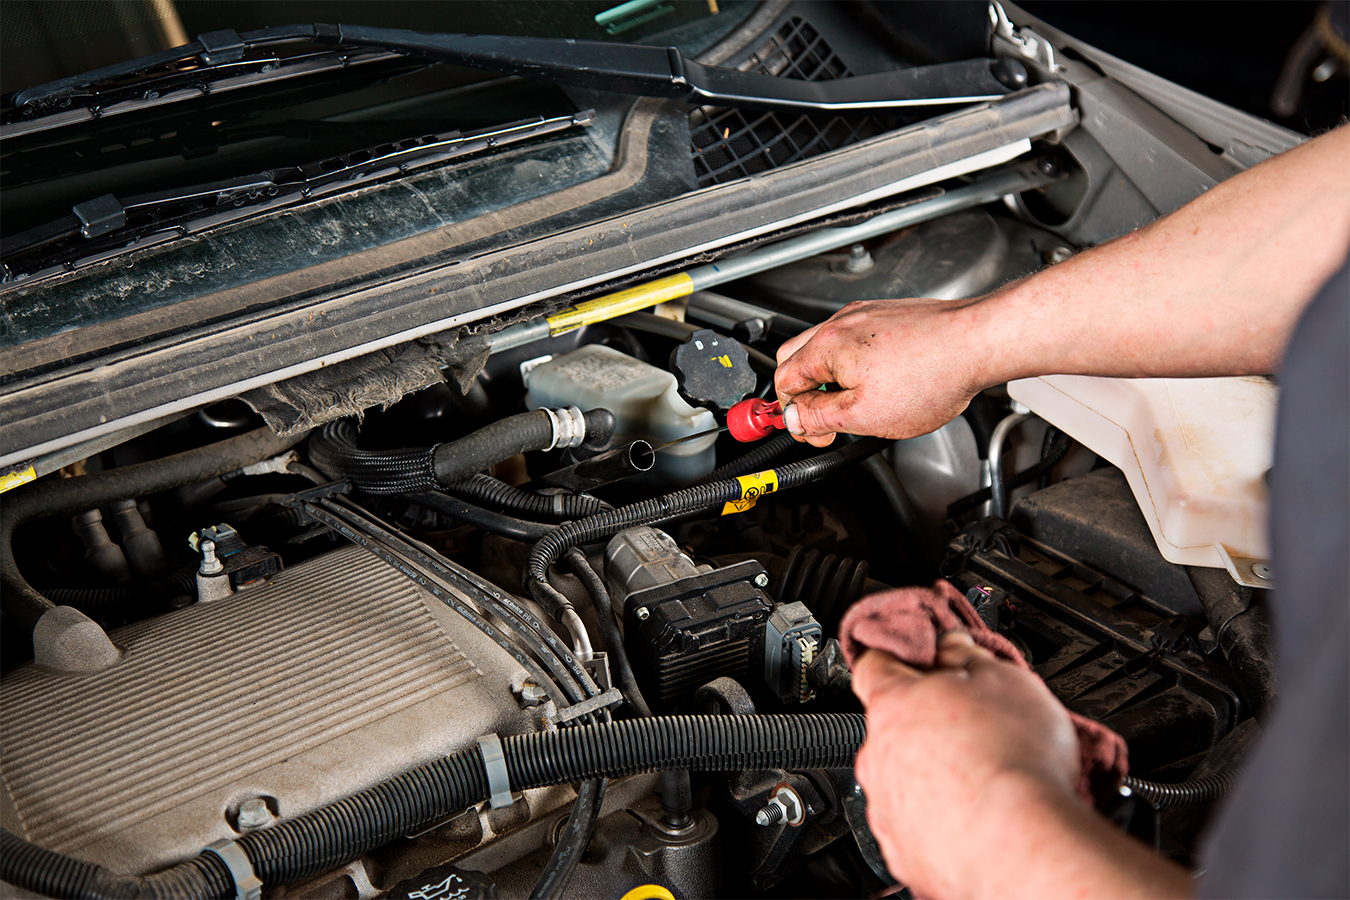 How To Check Transmission Fluid Check Your Transmission Fluid Level | National Transmission